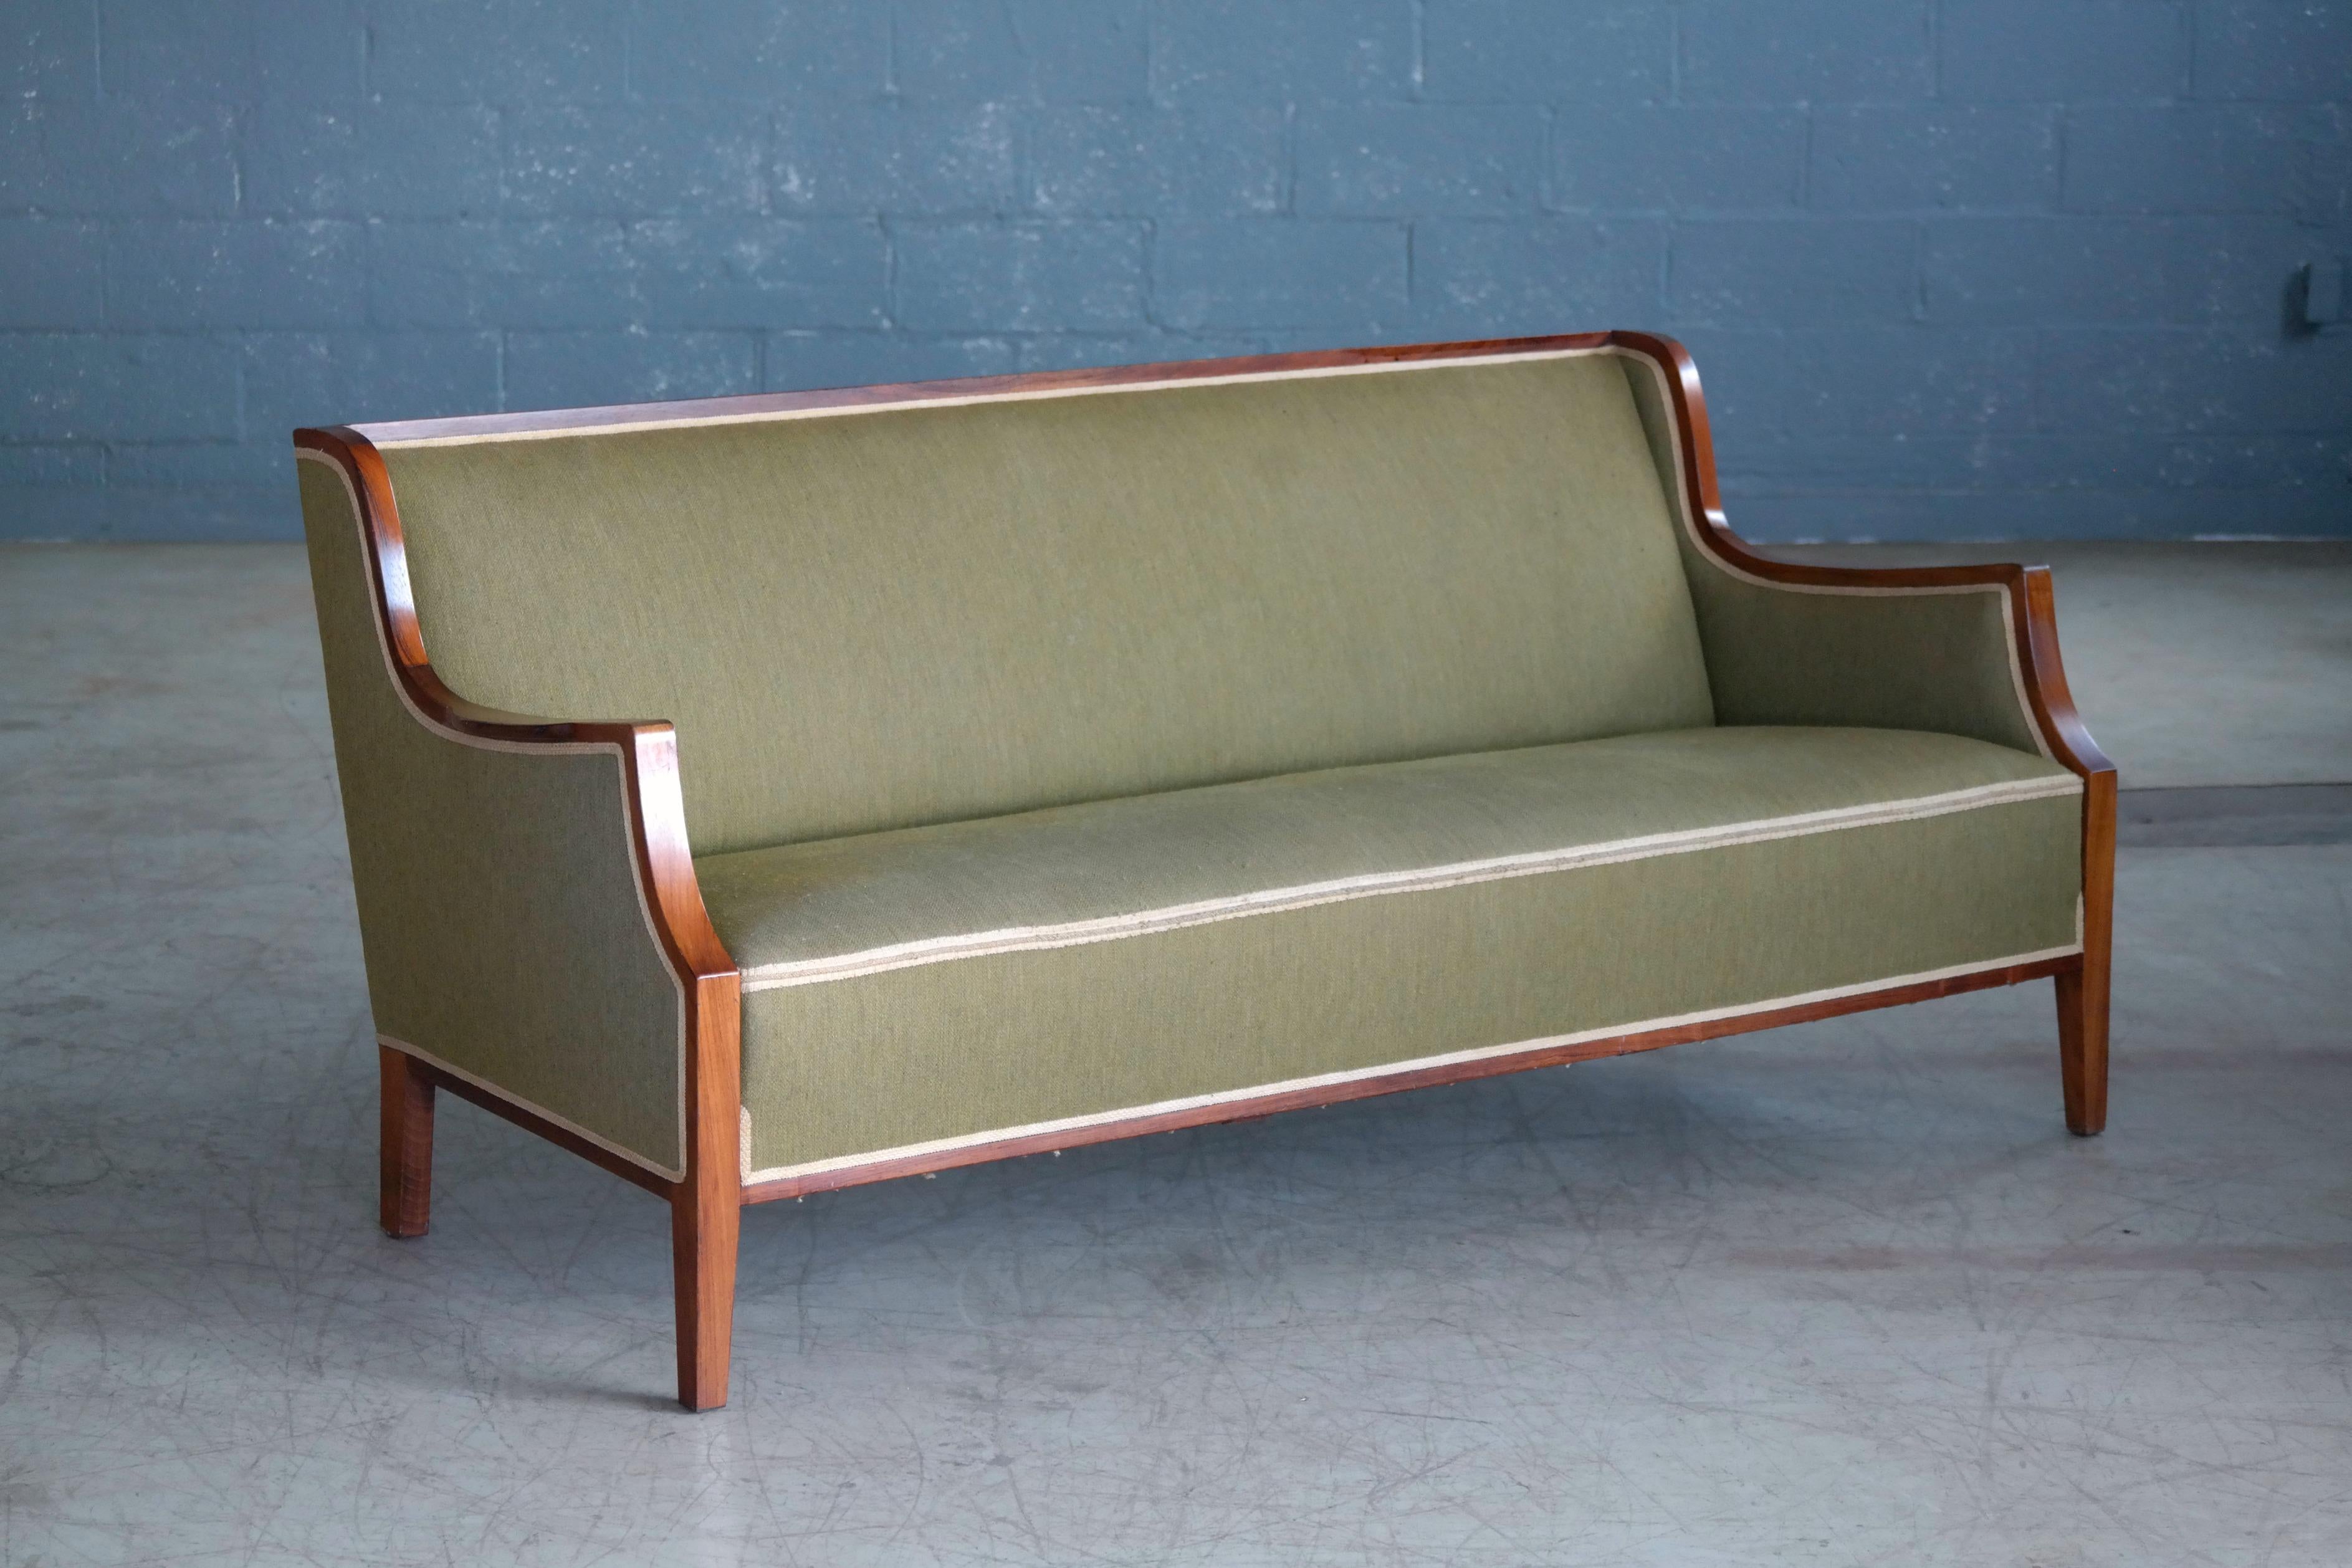 Frits Henningsen is famous for his Classic sofa designs with flared armrests and wooden frames extending into the tapered legs most of which were produced between 1935 and early 1940s. This sofa is a later and more modern version of his design